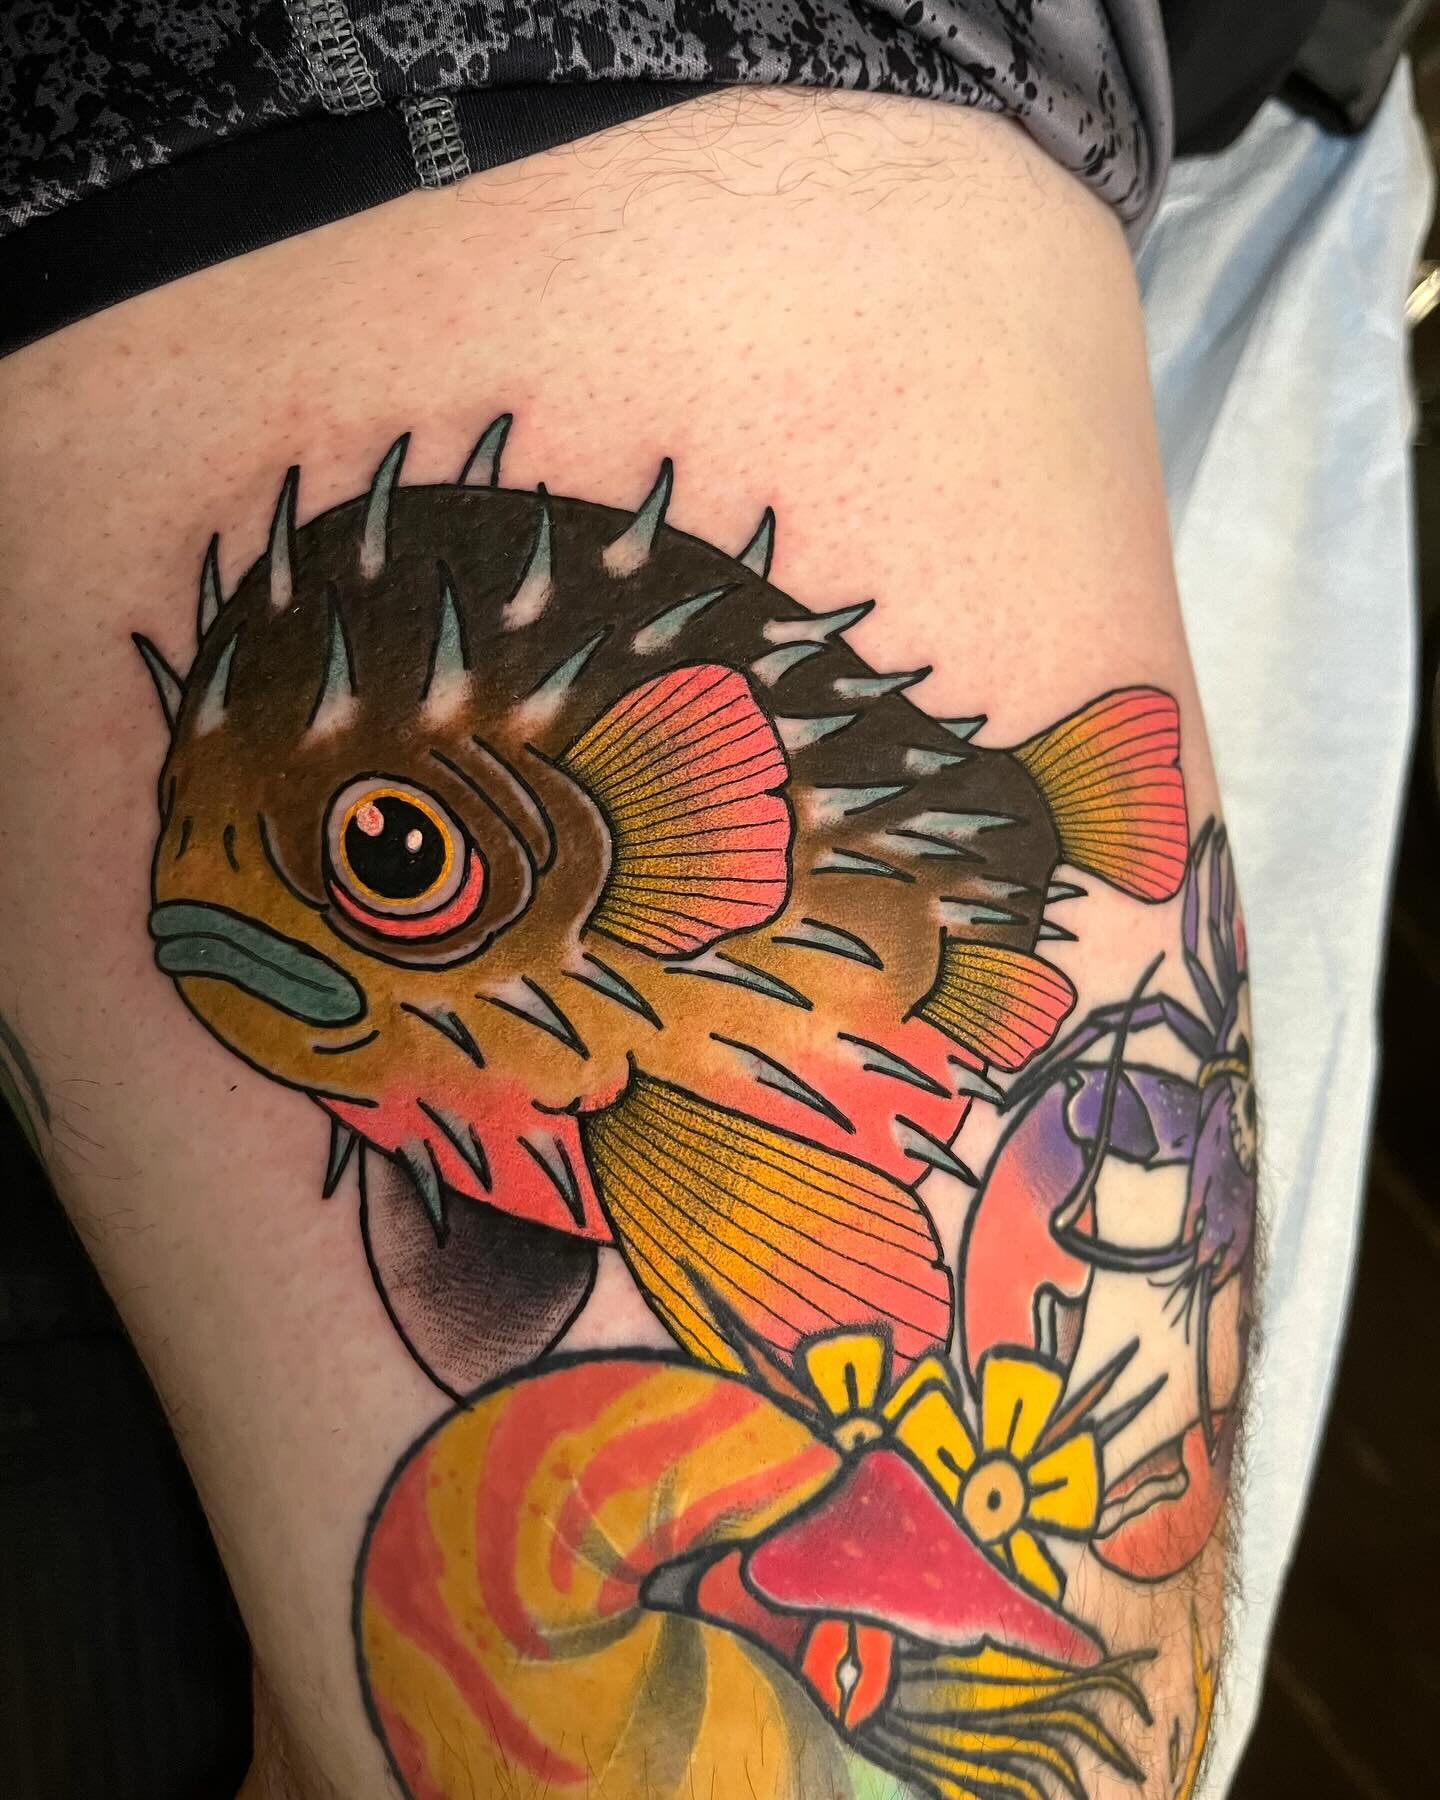 Added another fun one to this underwater leg sleeve 🐡
.
.
.
#traditional #traditionaltattoo #pufferfish #brightandbold #tattoo